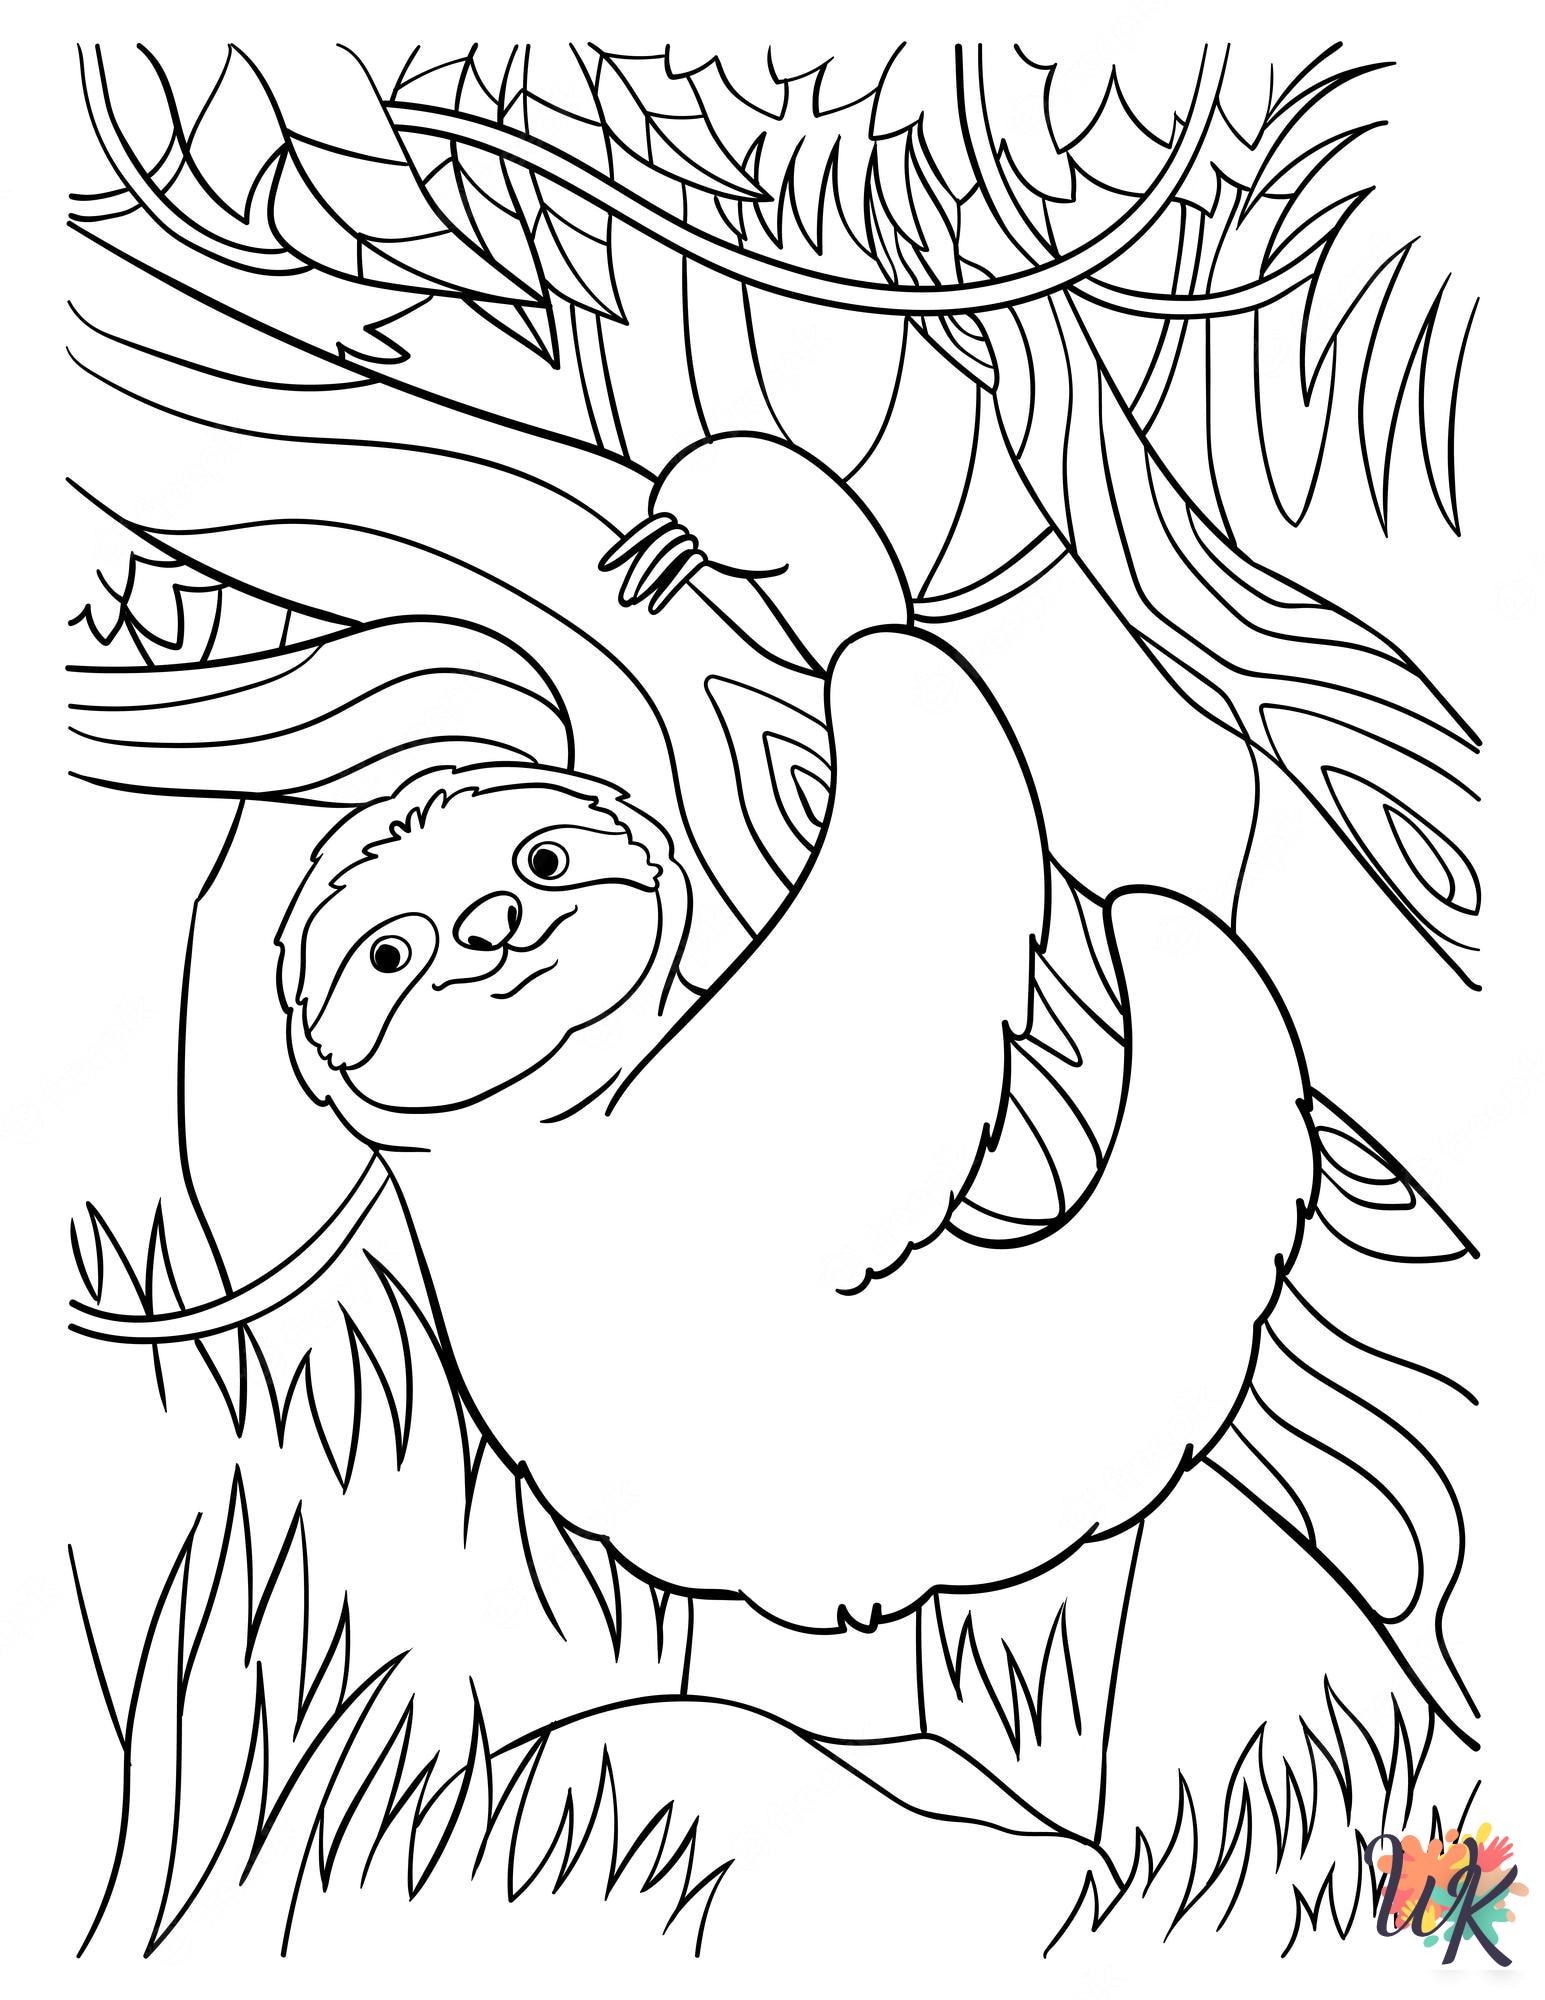 coloring pages for Sloth